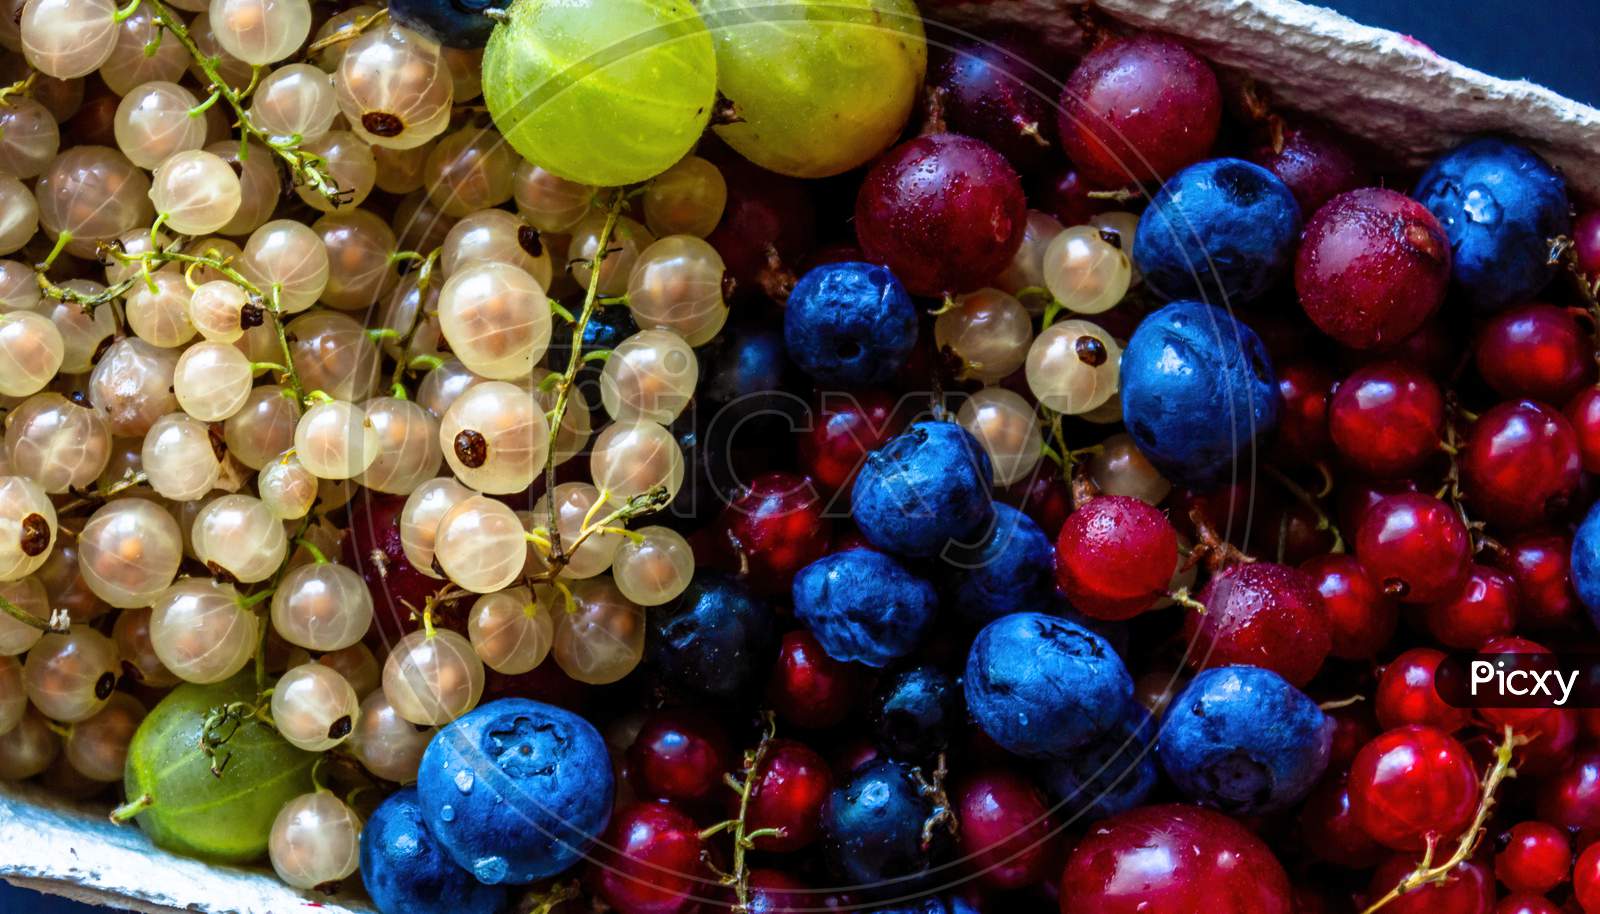 Abstract Close Up Colorful Berries Such As Blueberry, Cherry White Currant & Red Currant